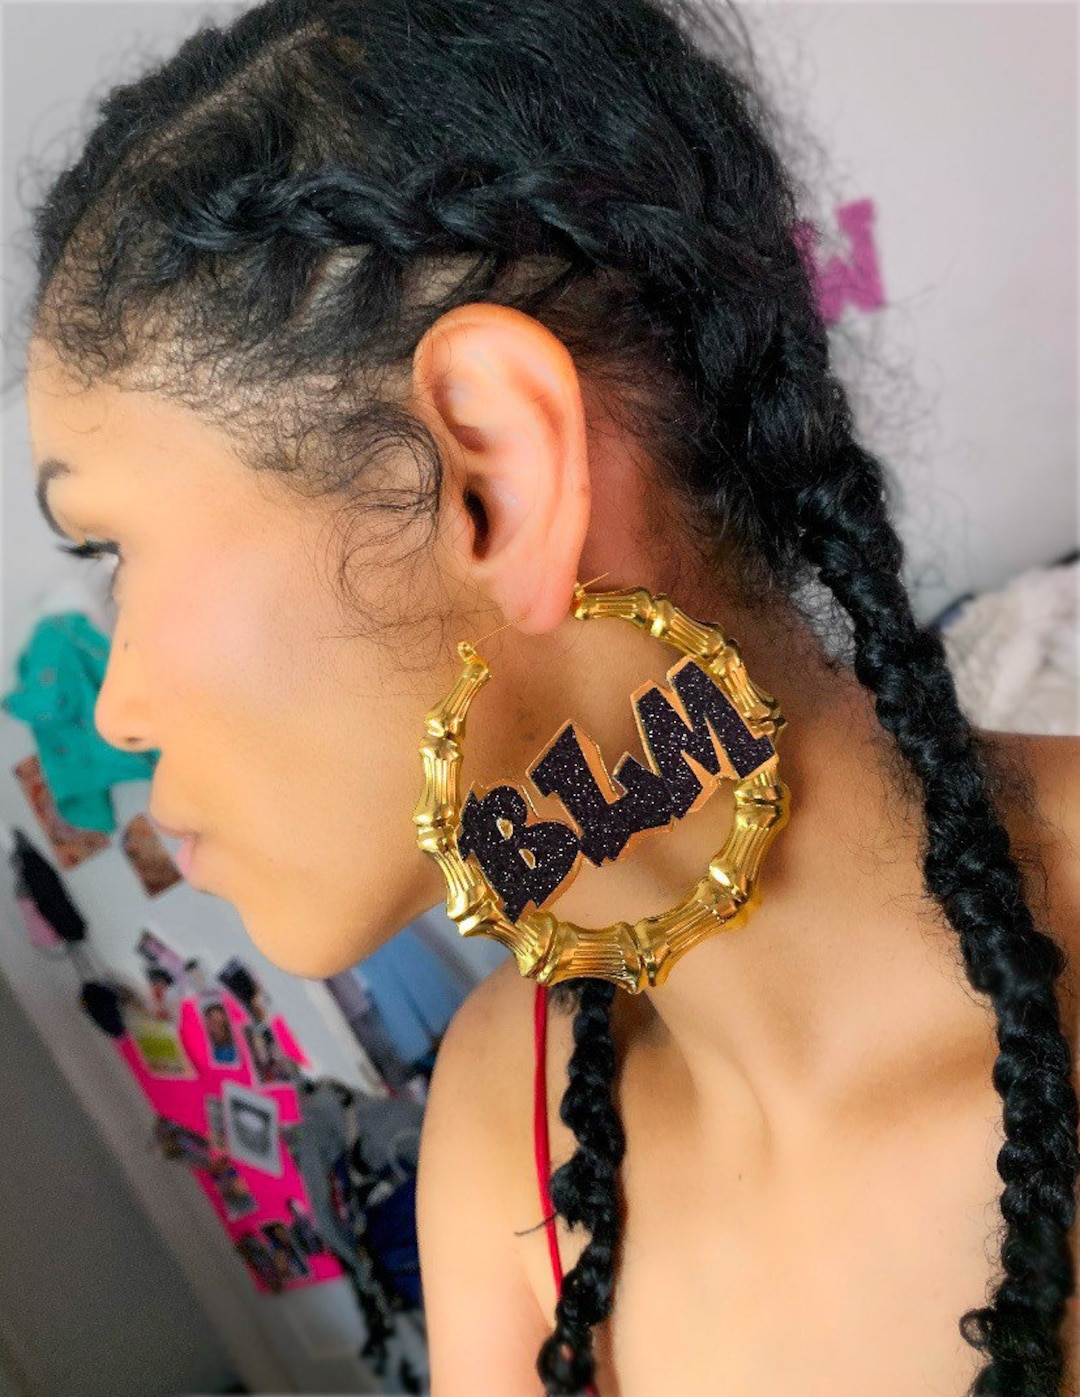 How Bamboo Earrings Became Iconic  by Tanisha Ford  ZORA